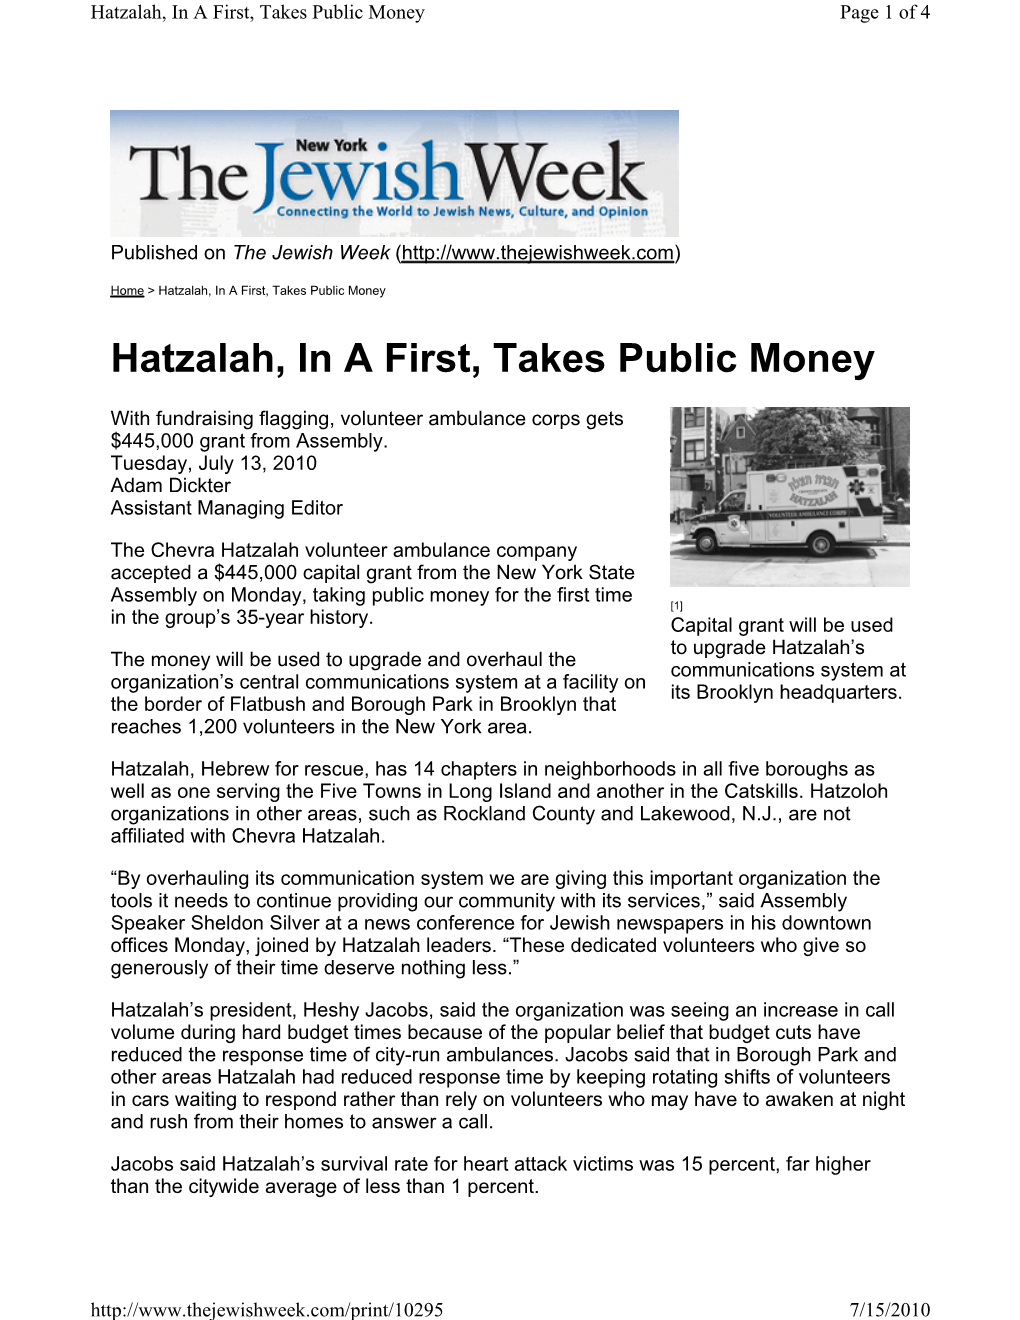 Hatzalah, in a First, Takes Public Money Page 1 of 4